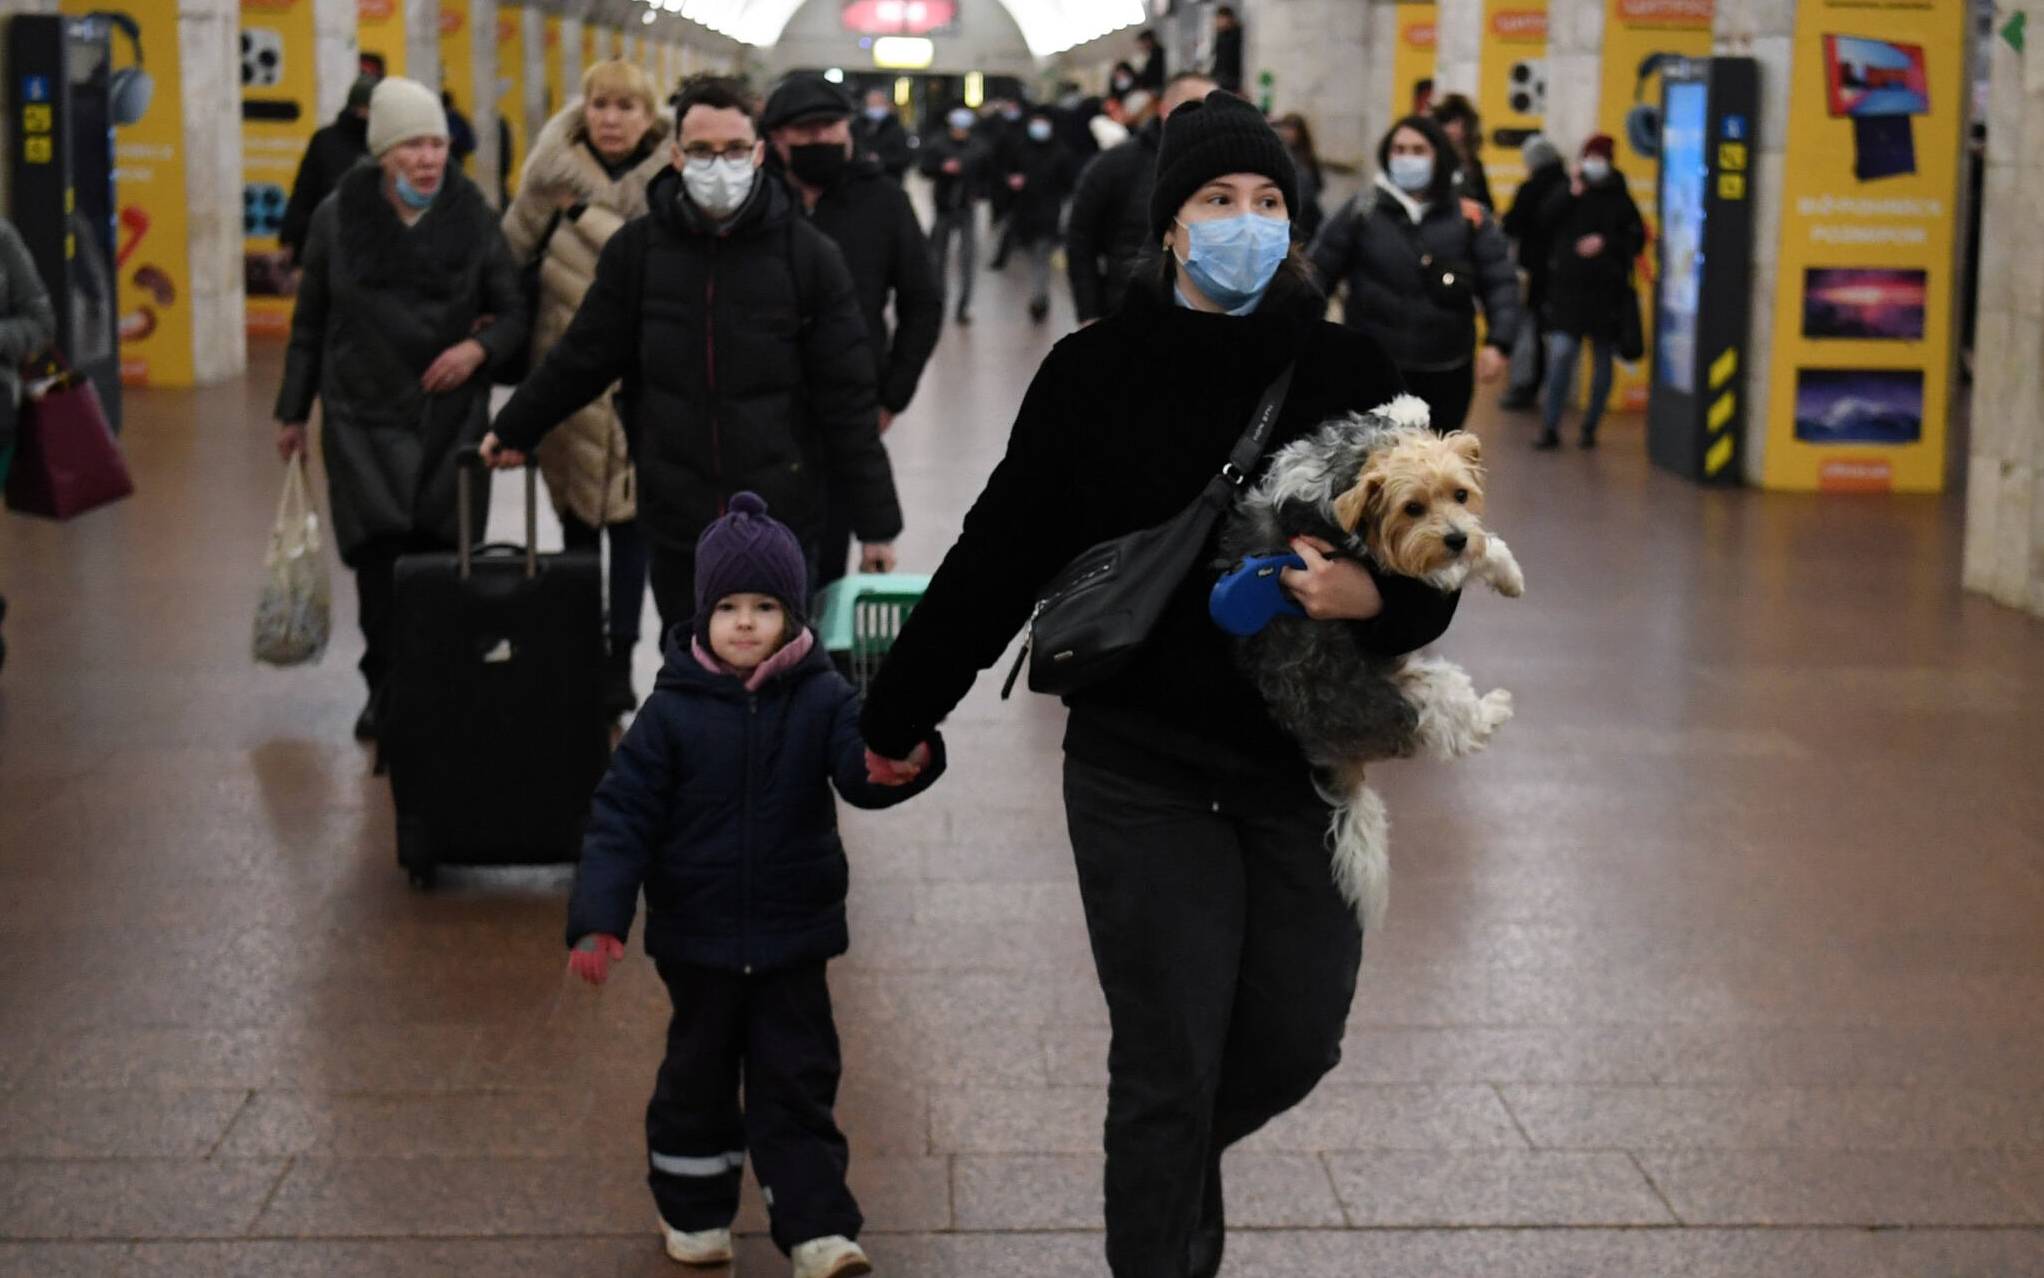 A woman with a child and a dog walks at a metro station in Kyiv early on February 24, 2022. - Russian President Vladimir Putin announced a military operation in Ukraine on Thursday with explosions heard soon after across the country and its foreign minister warning a "full-scale invasion" was underway. (Photo by Daniel LEAL / AFP)